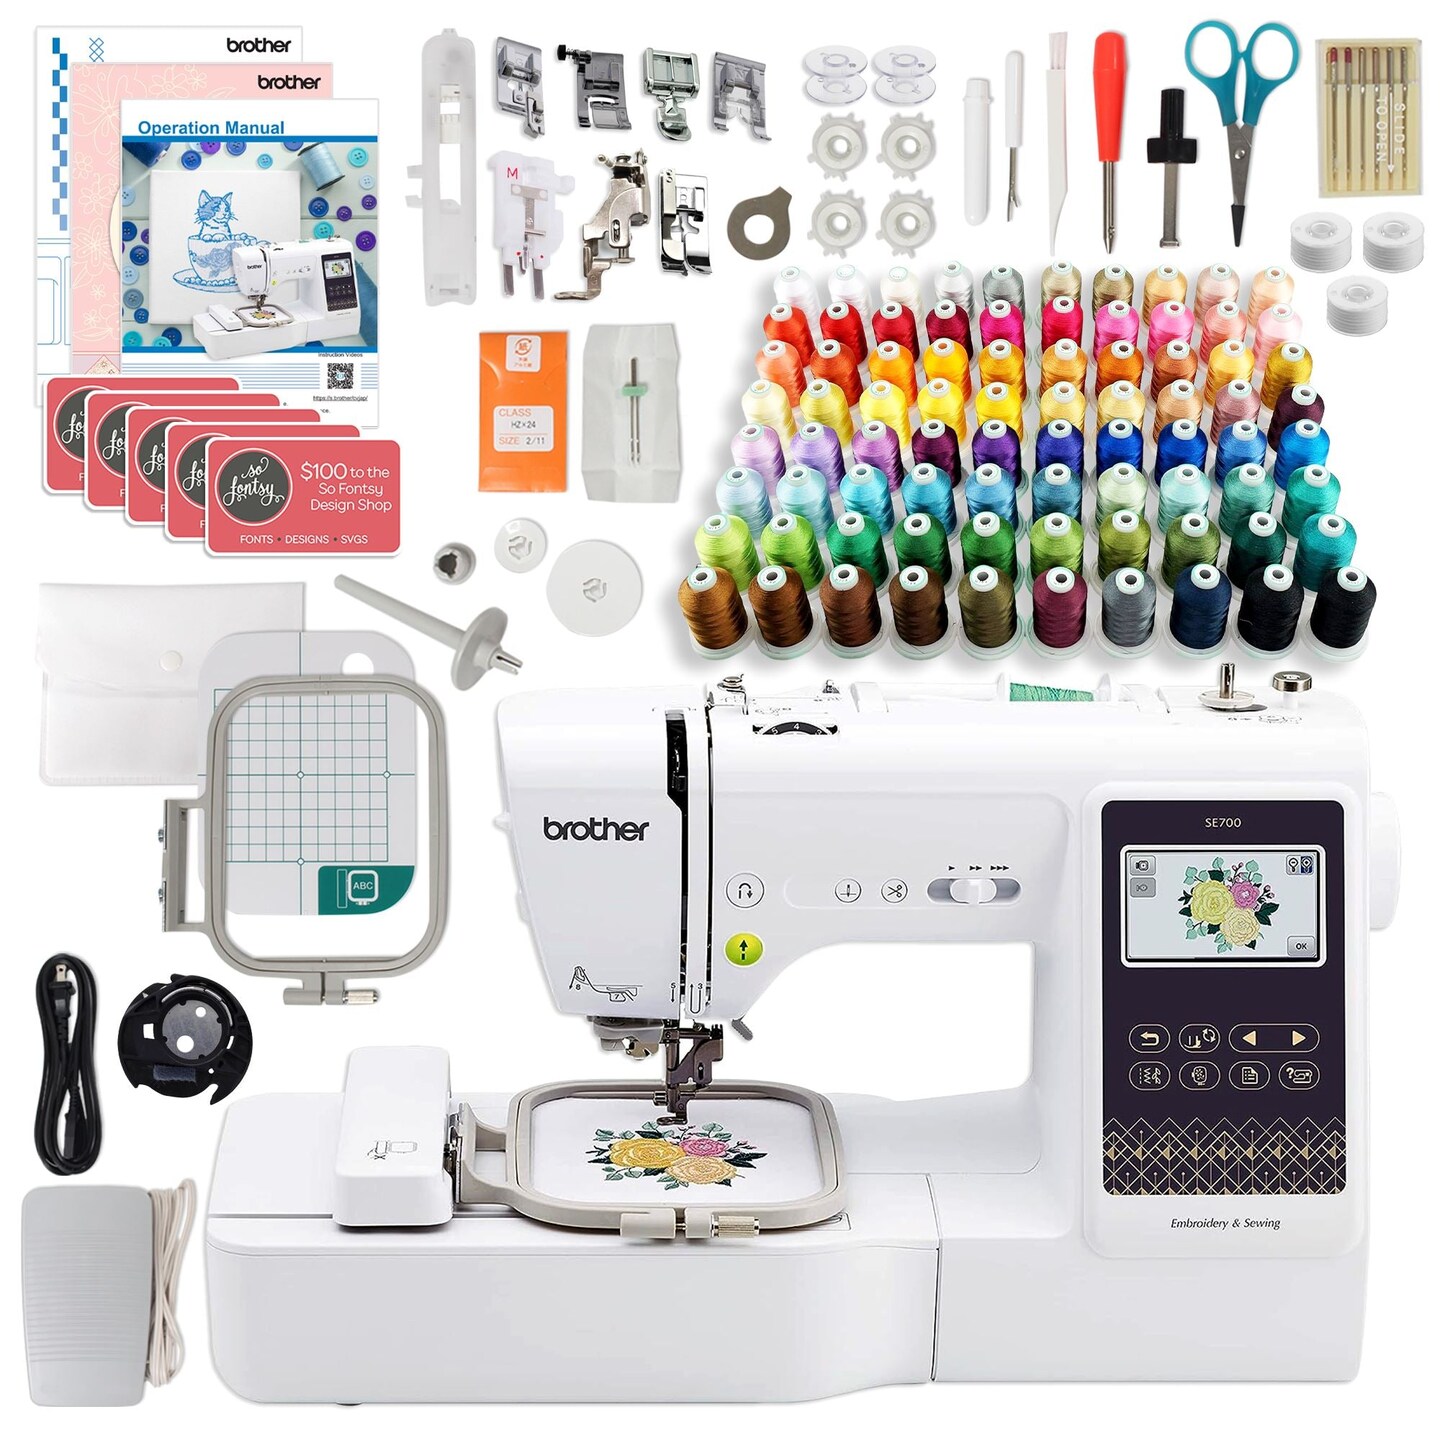 Brother SE700 Embroidery &#x26; Sewing Machine w/ 80 Embroidery Spools &#x26; Accessories